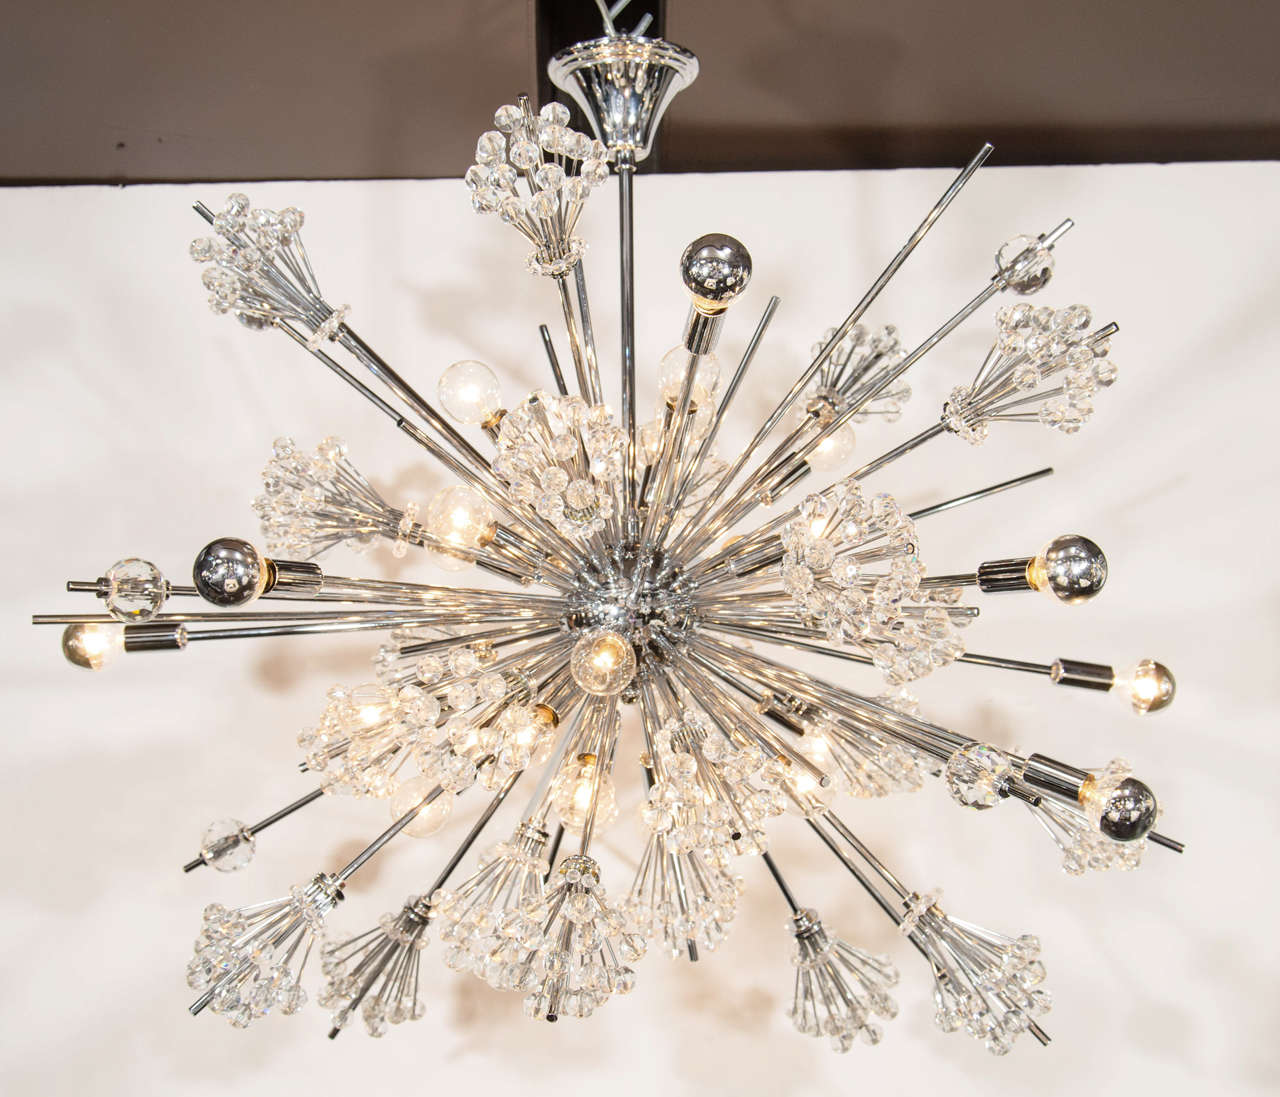 Rare and outstanding chandelier with starburst design, comprised of polished nickel atomic sputnik frame and fittings, and with clusters of Austrian hand cut crystals throughout. Fitted with an amazing 28 lights. This piece is a smaller variation of